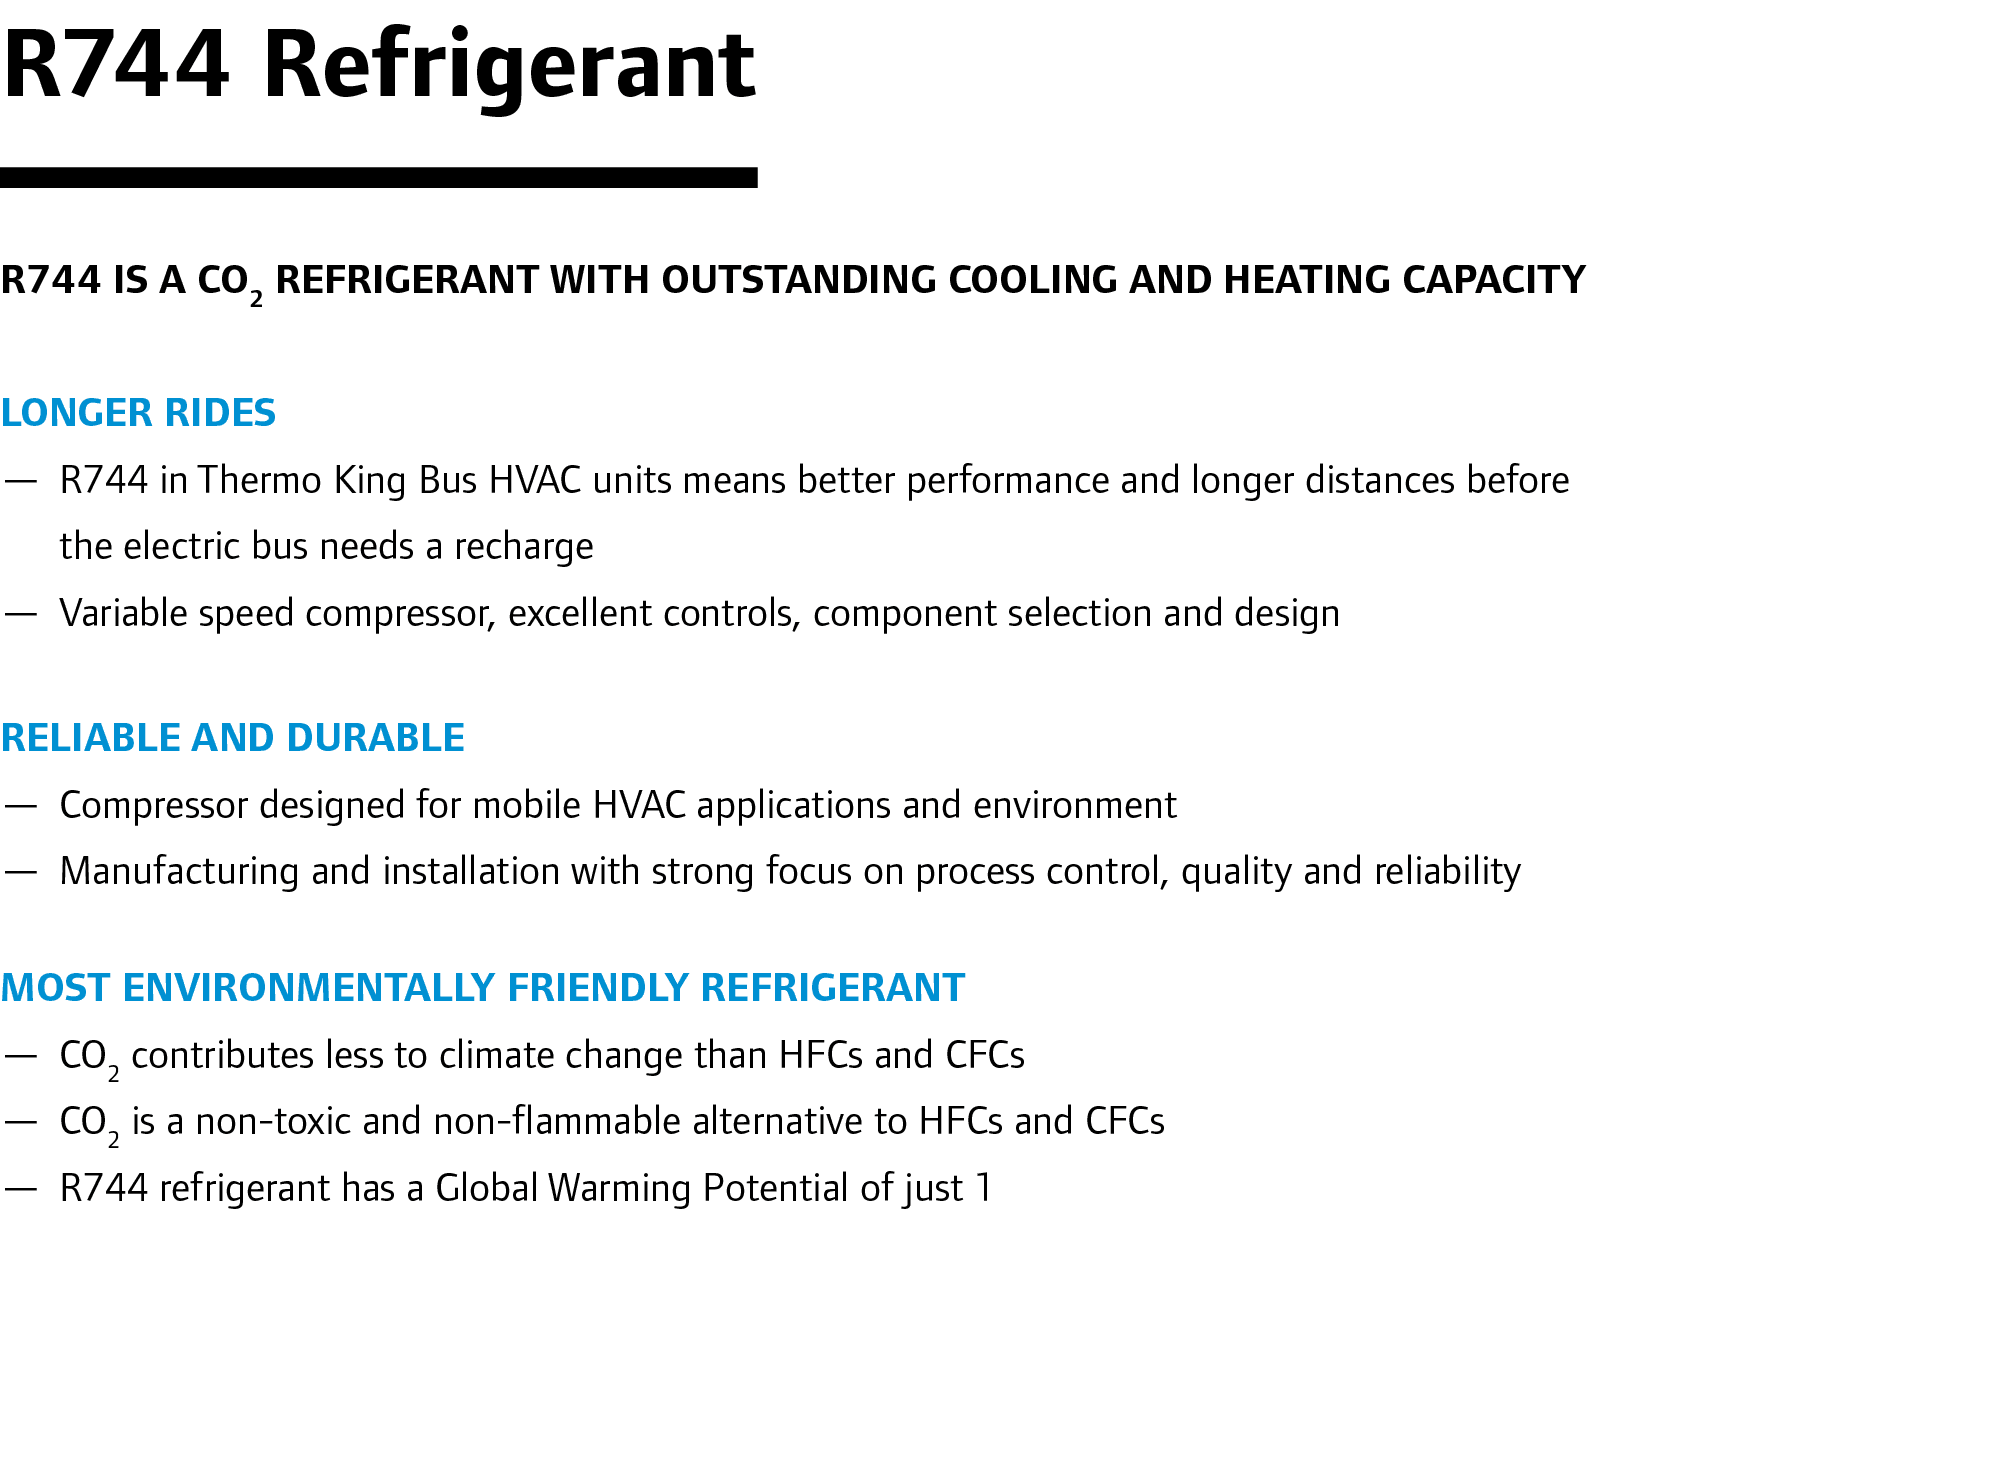 R744 Refrigerant R744 is a CO2 refrigerant with outstanding cooling and heating capacity Longer rides — R744 in Ther...